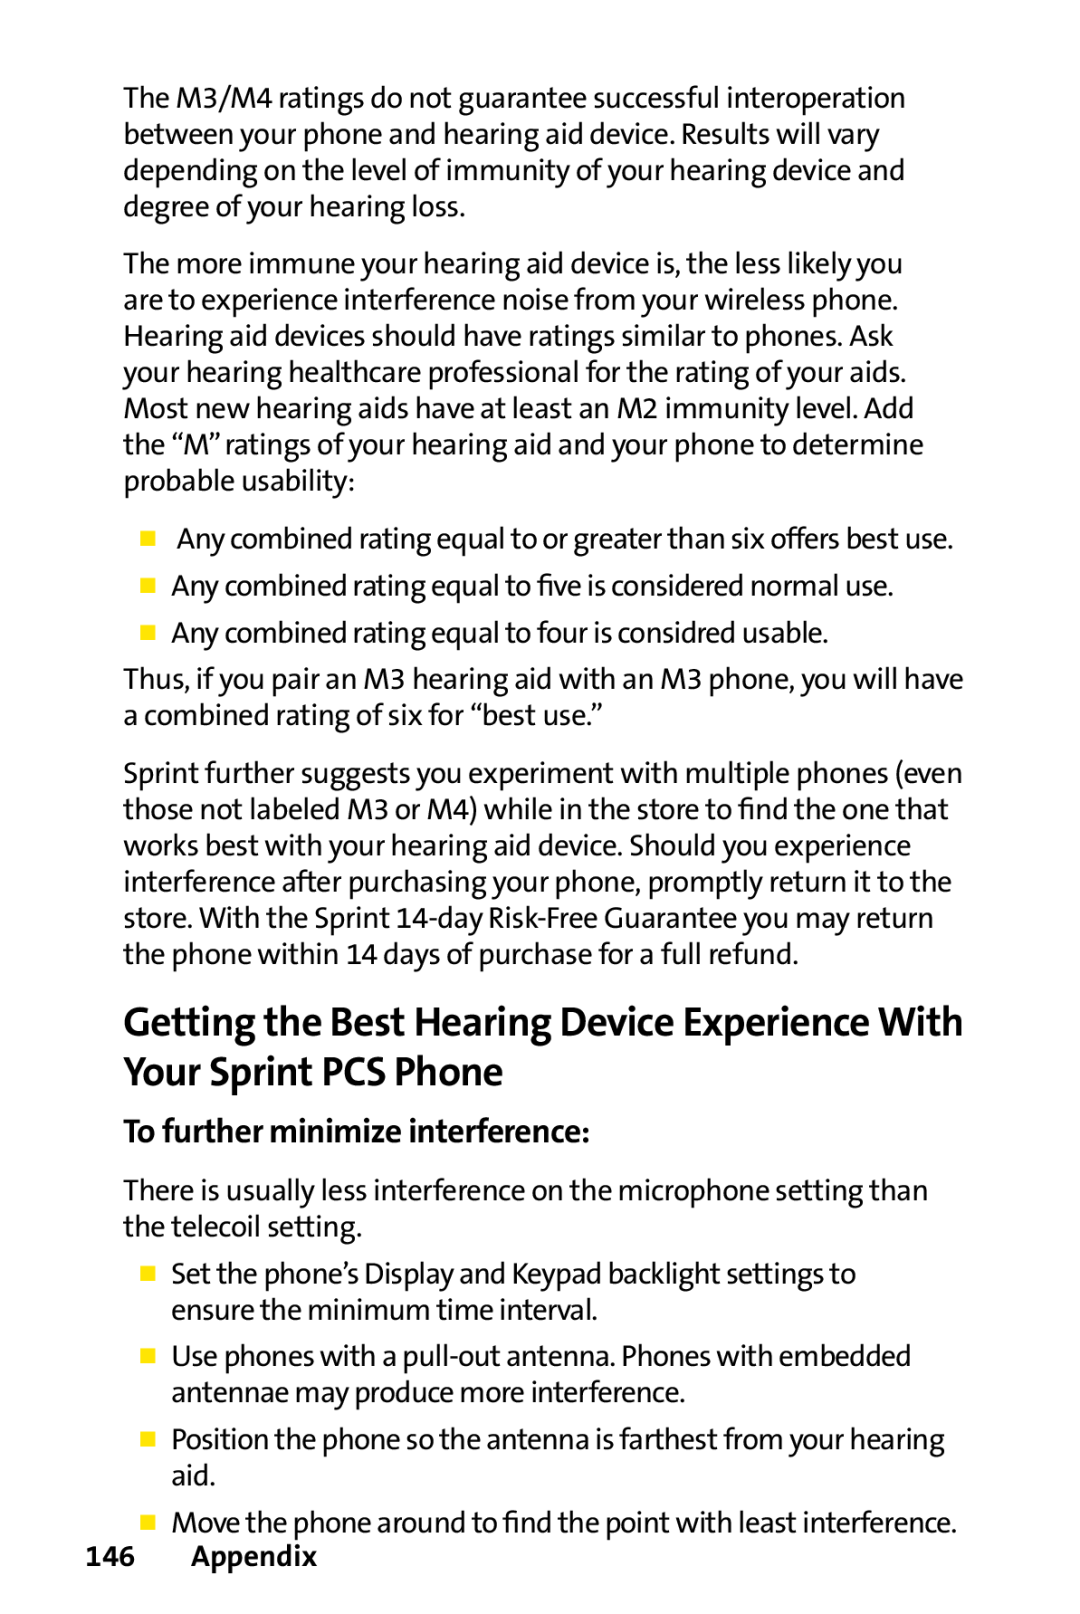 Sprint Nextel PPC-6700 manual Getting the Best Hearing Device Experience With Your Sprint PCS Phone, Appendix 